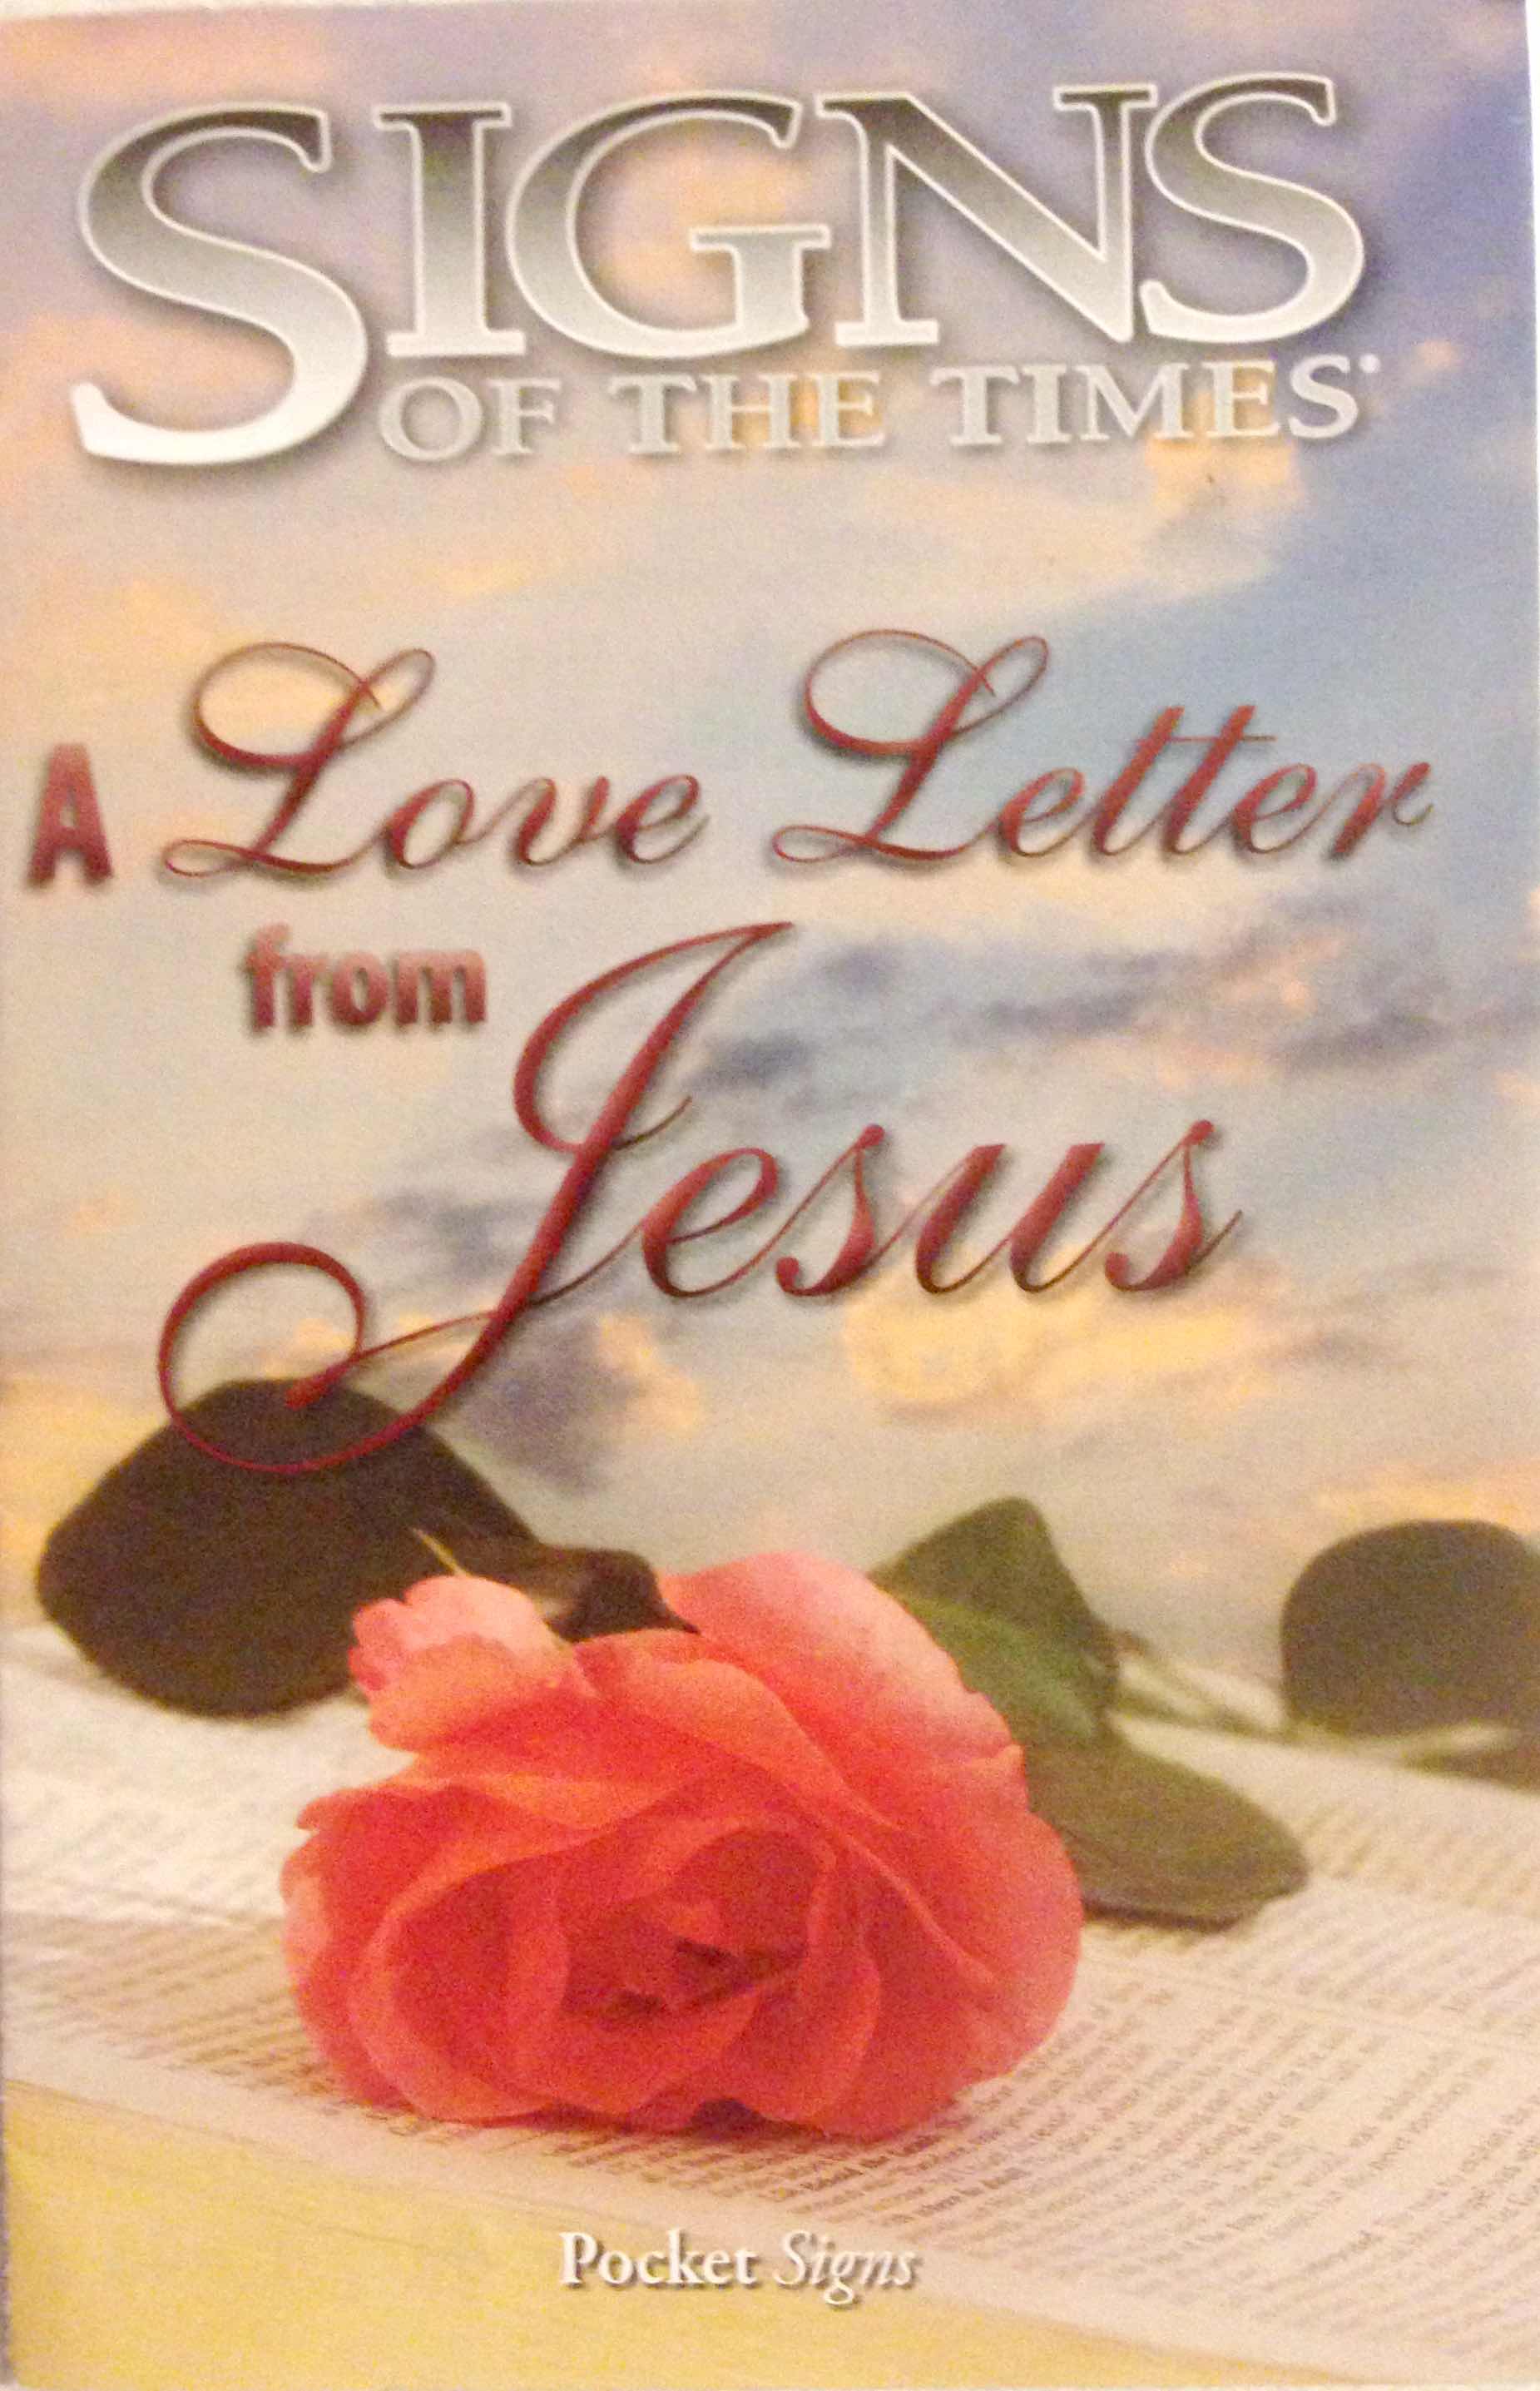 The enlarged cover of the pocket-sized tract.